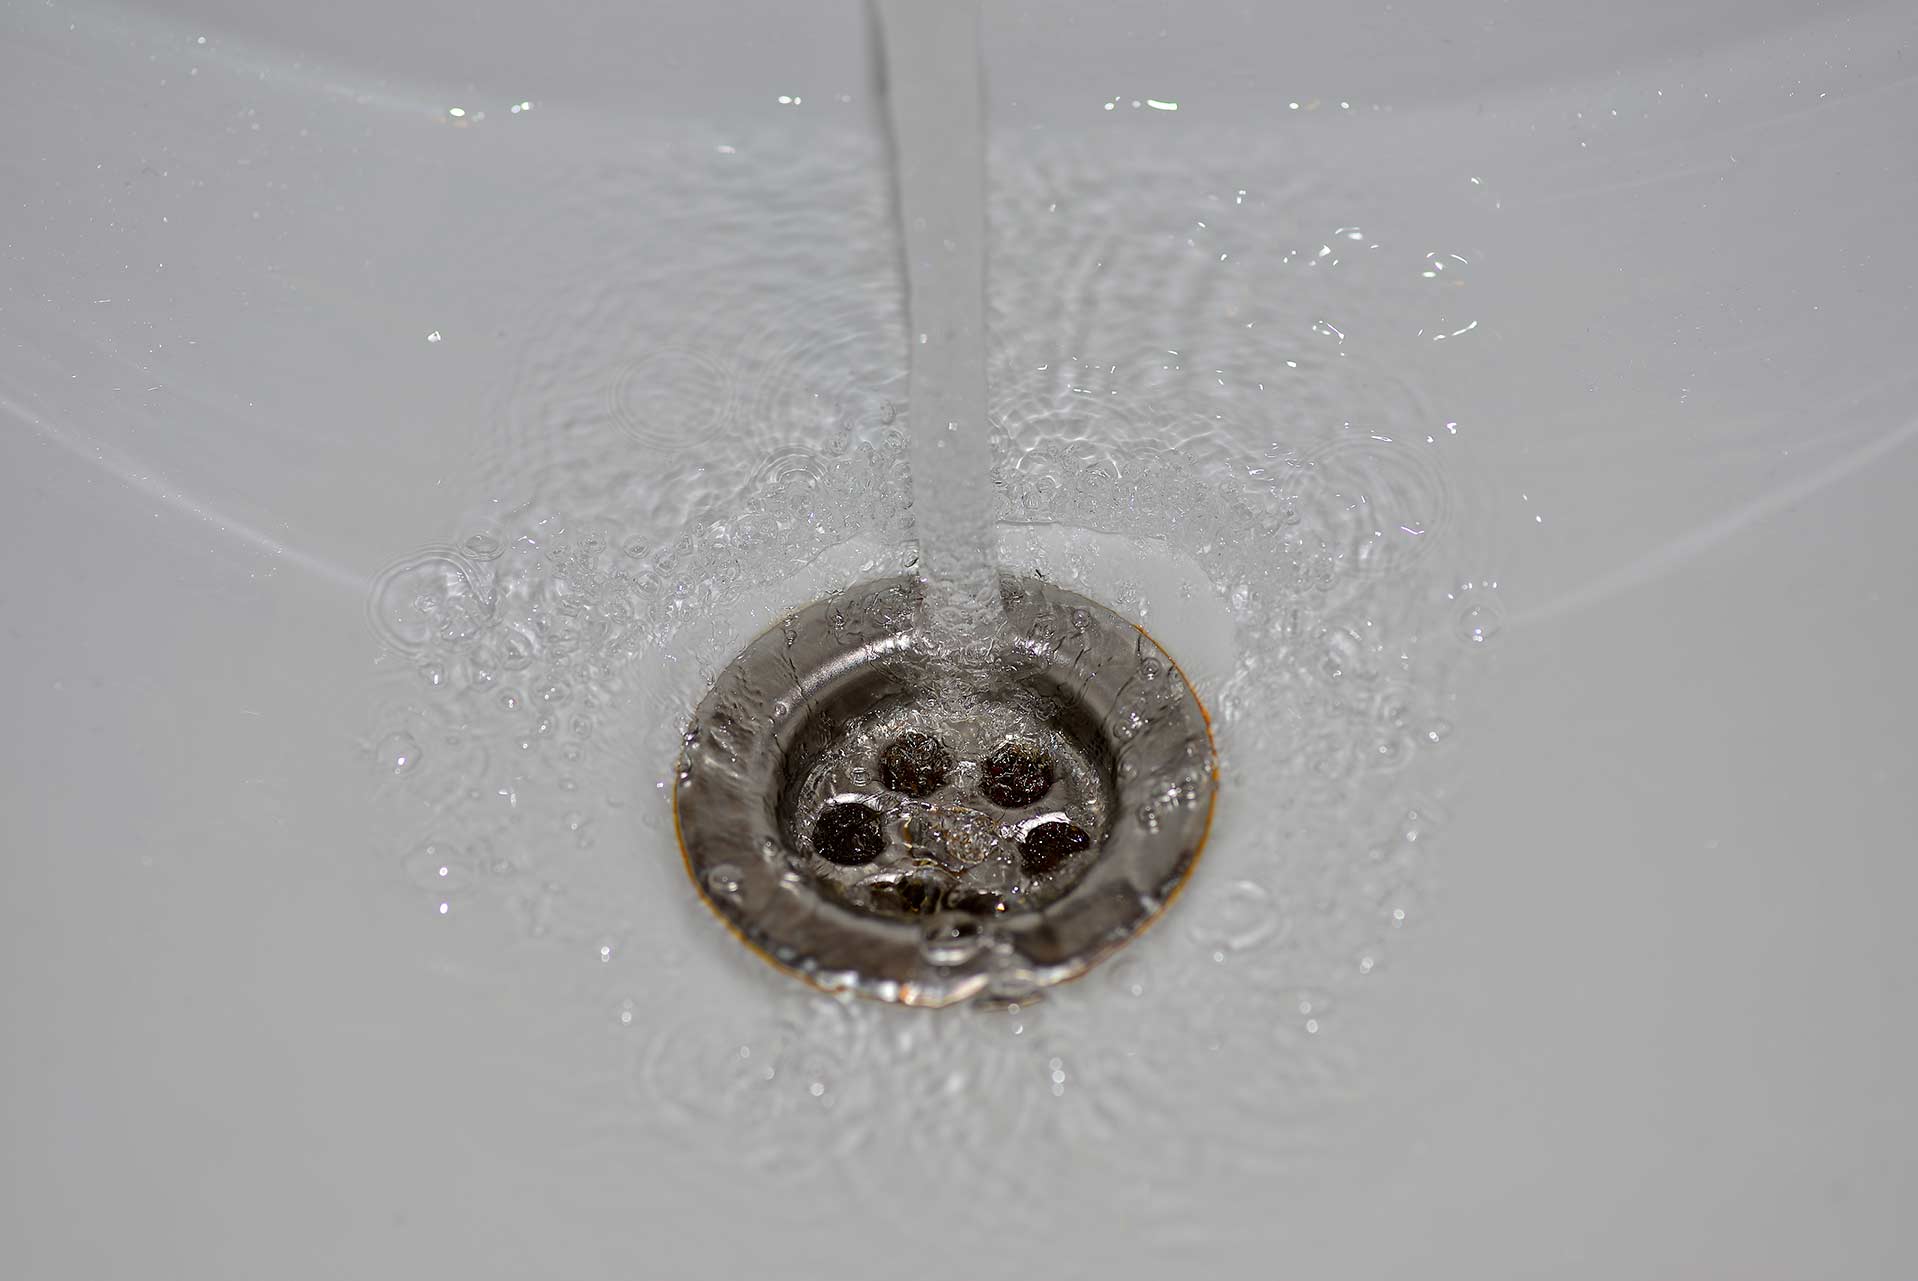 A2B Drains provides services to unblock blocked sinks and drains for properties in Luton.